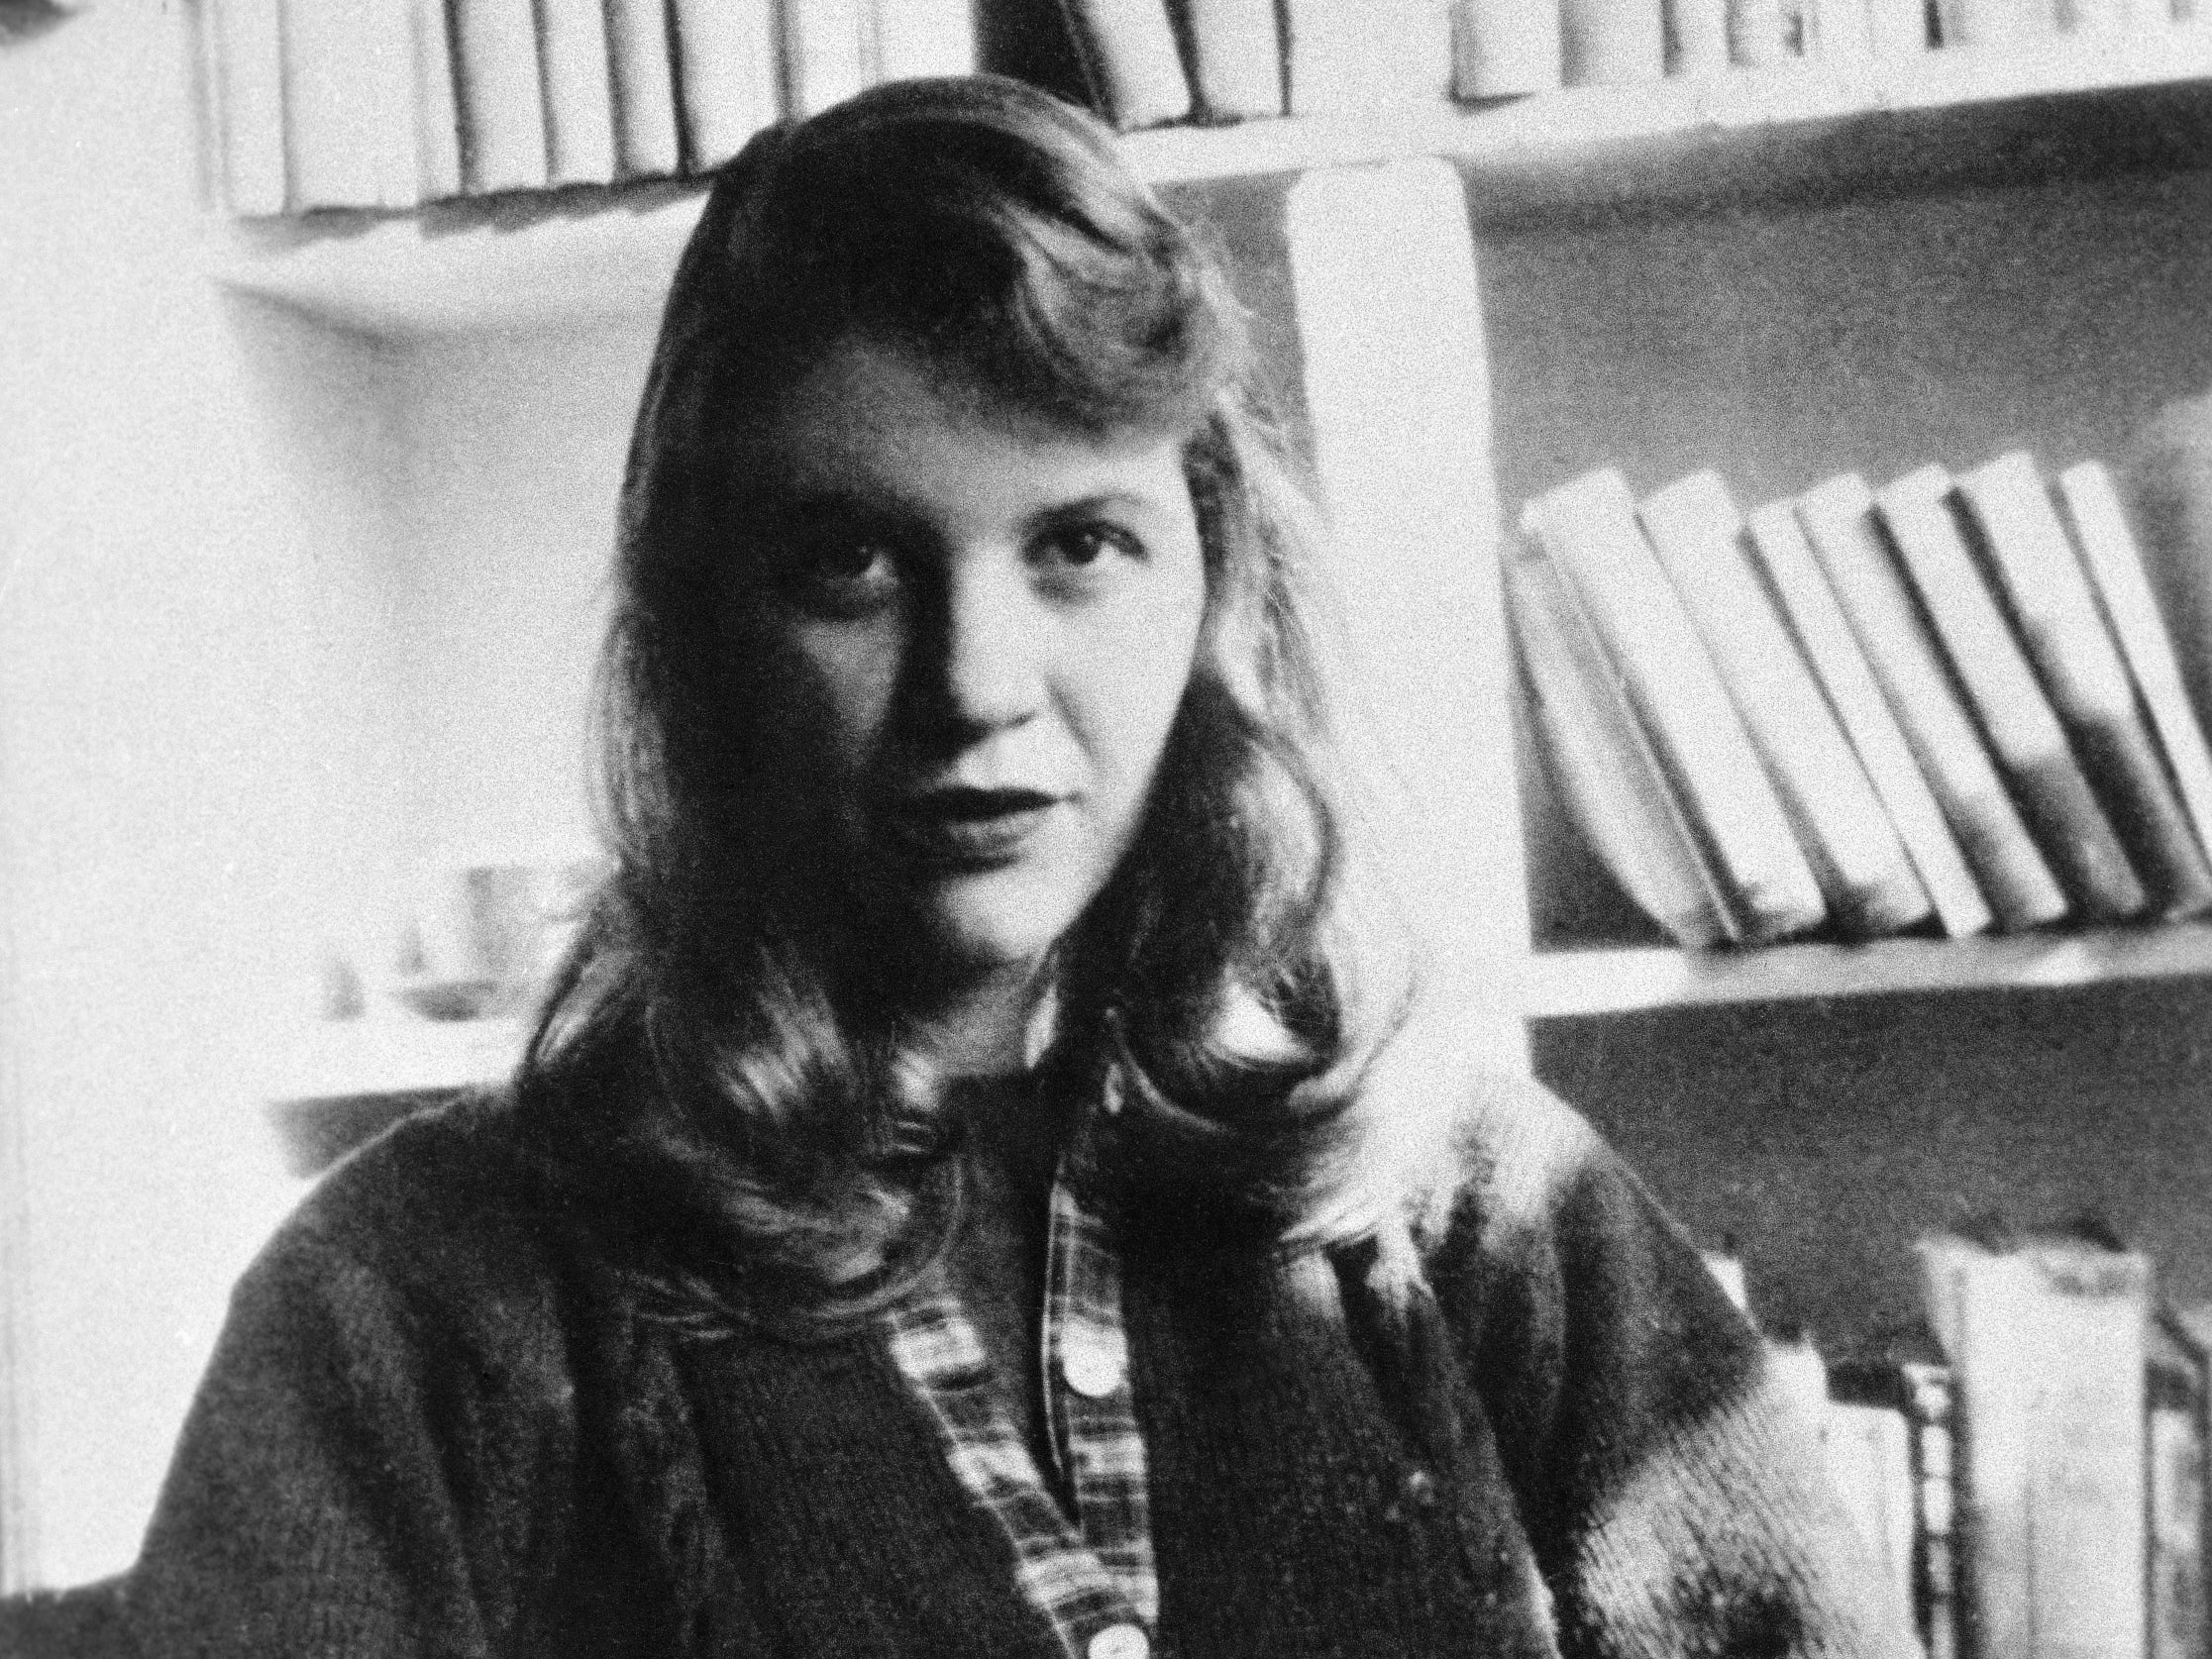 Sylvia Plath only wrote one novel, ‘The Bell Jar’ in 1963, which resonates with every teenager trying to fit into the world